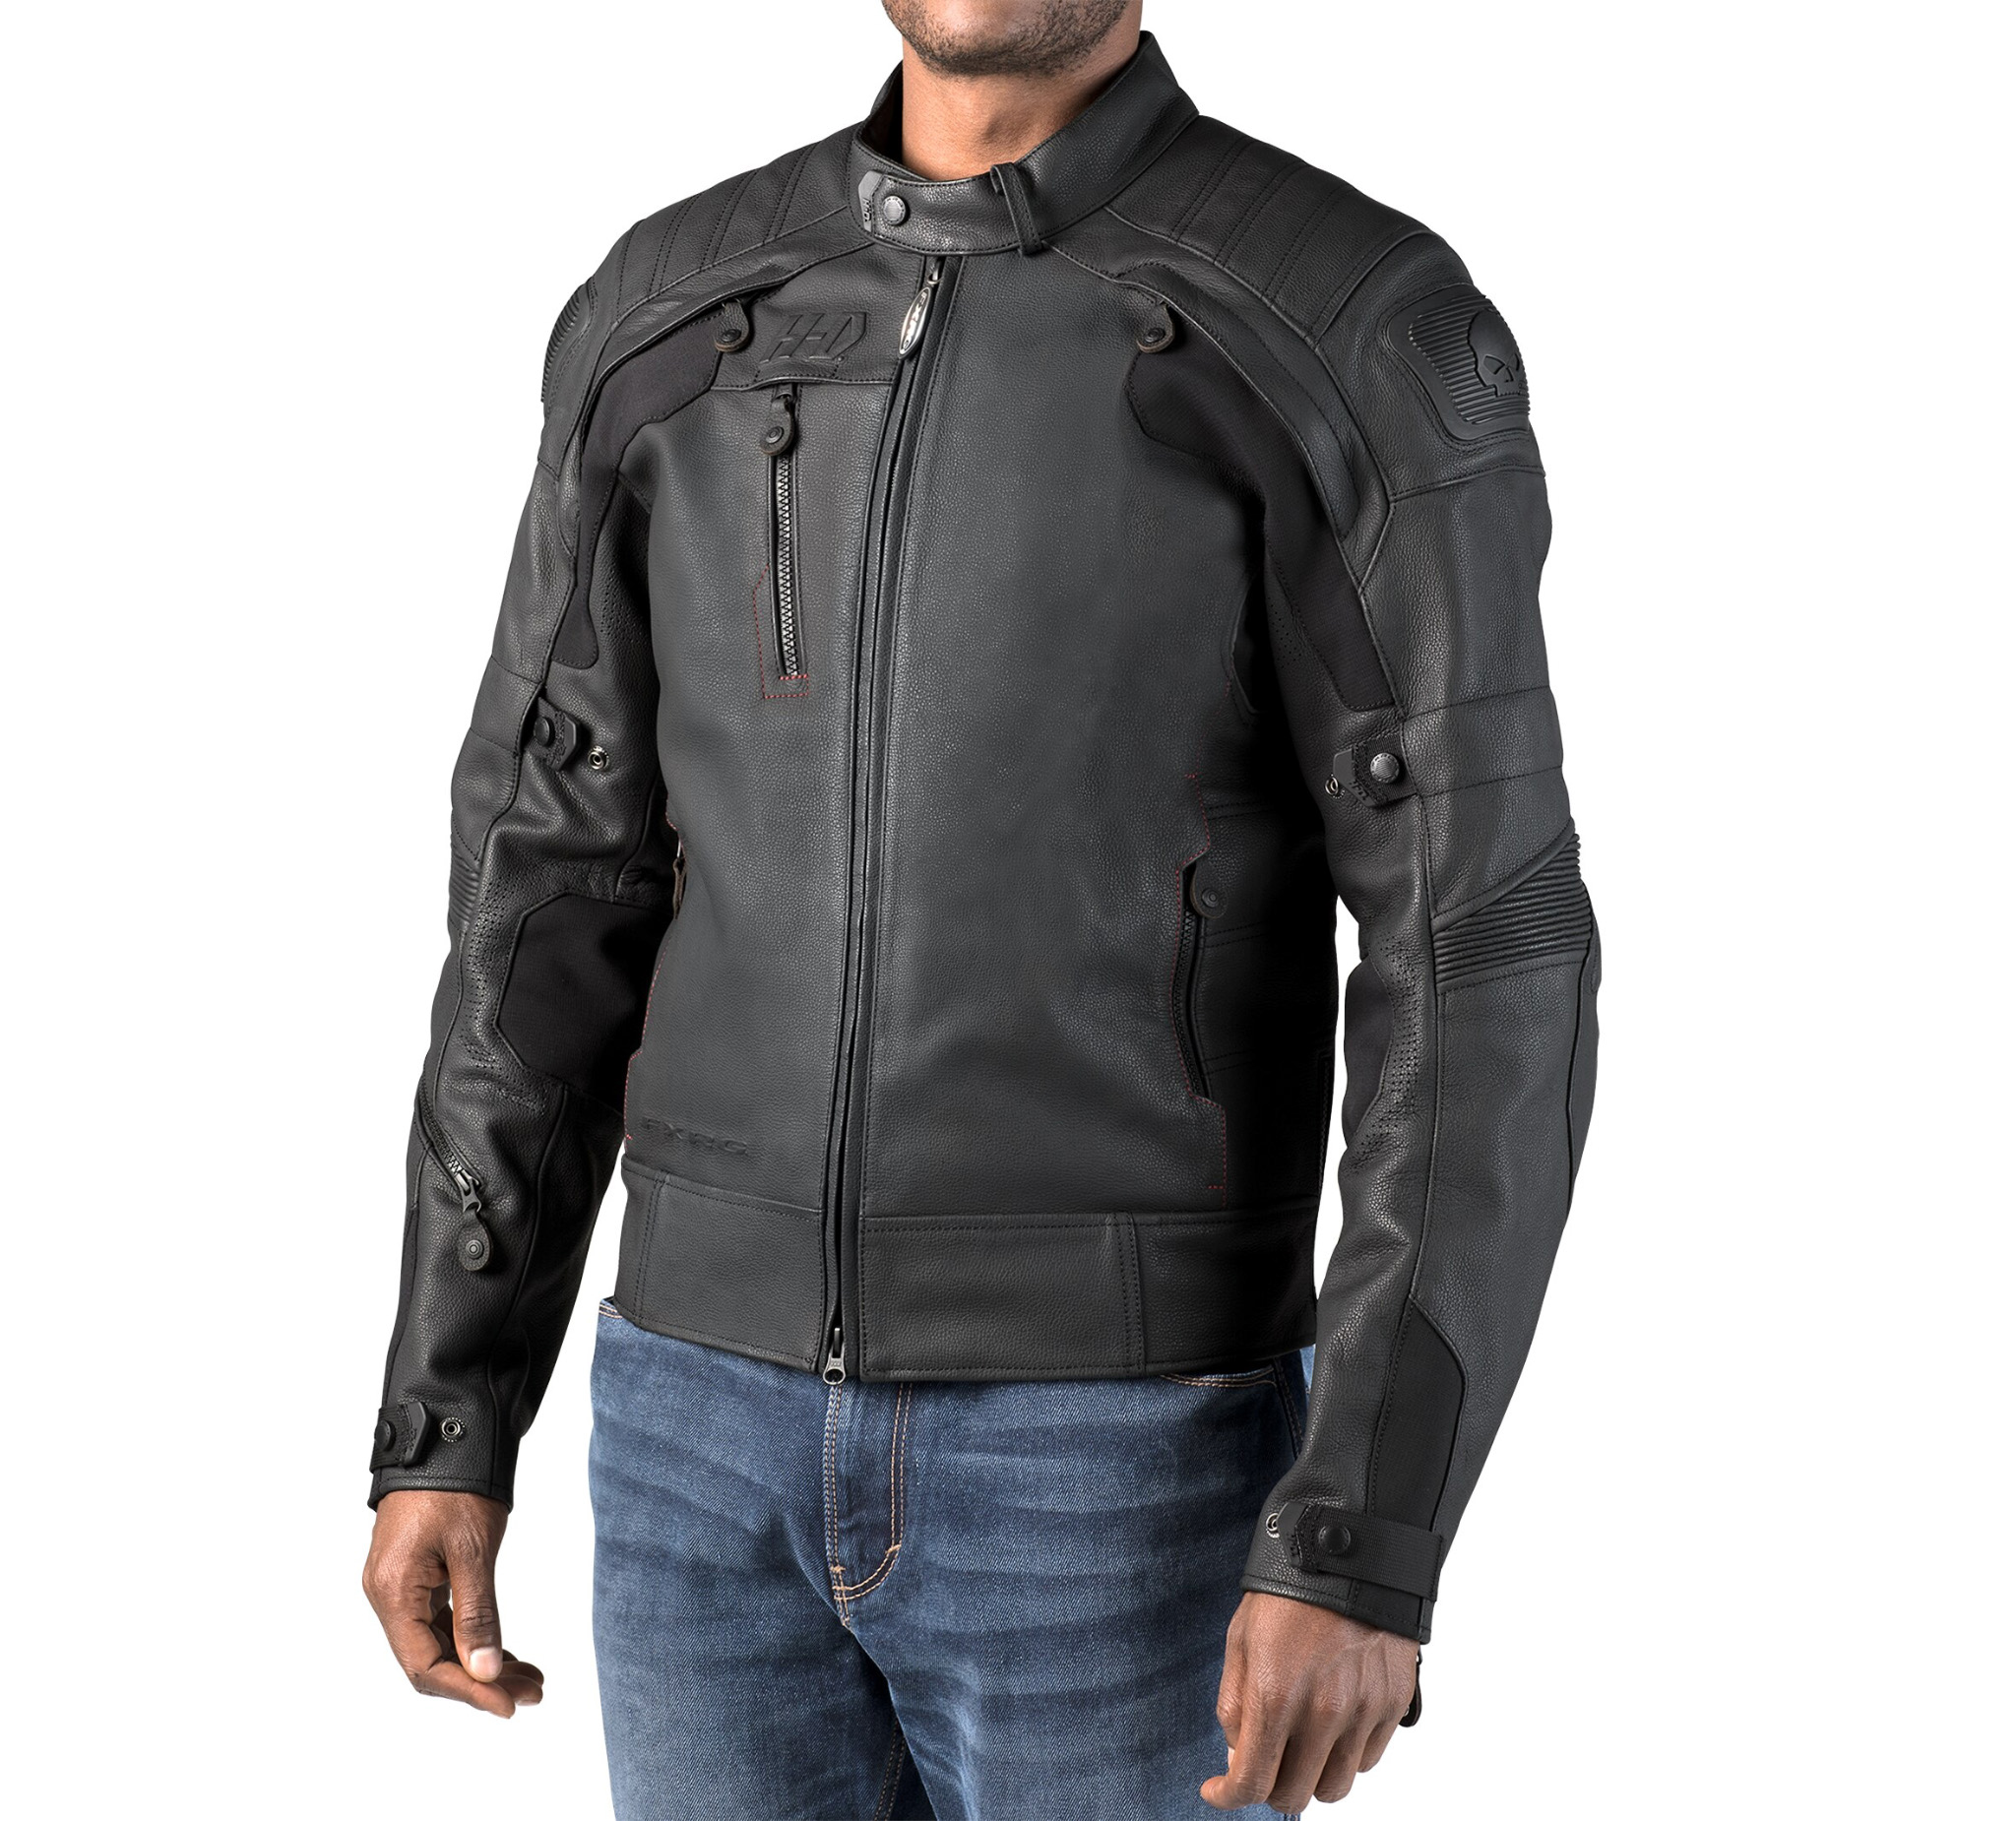 Men S Fxrg Gratify Leather Jacket With Coolcore Technology 98051 19vm Harley Davidson Luxembourg